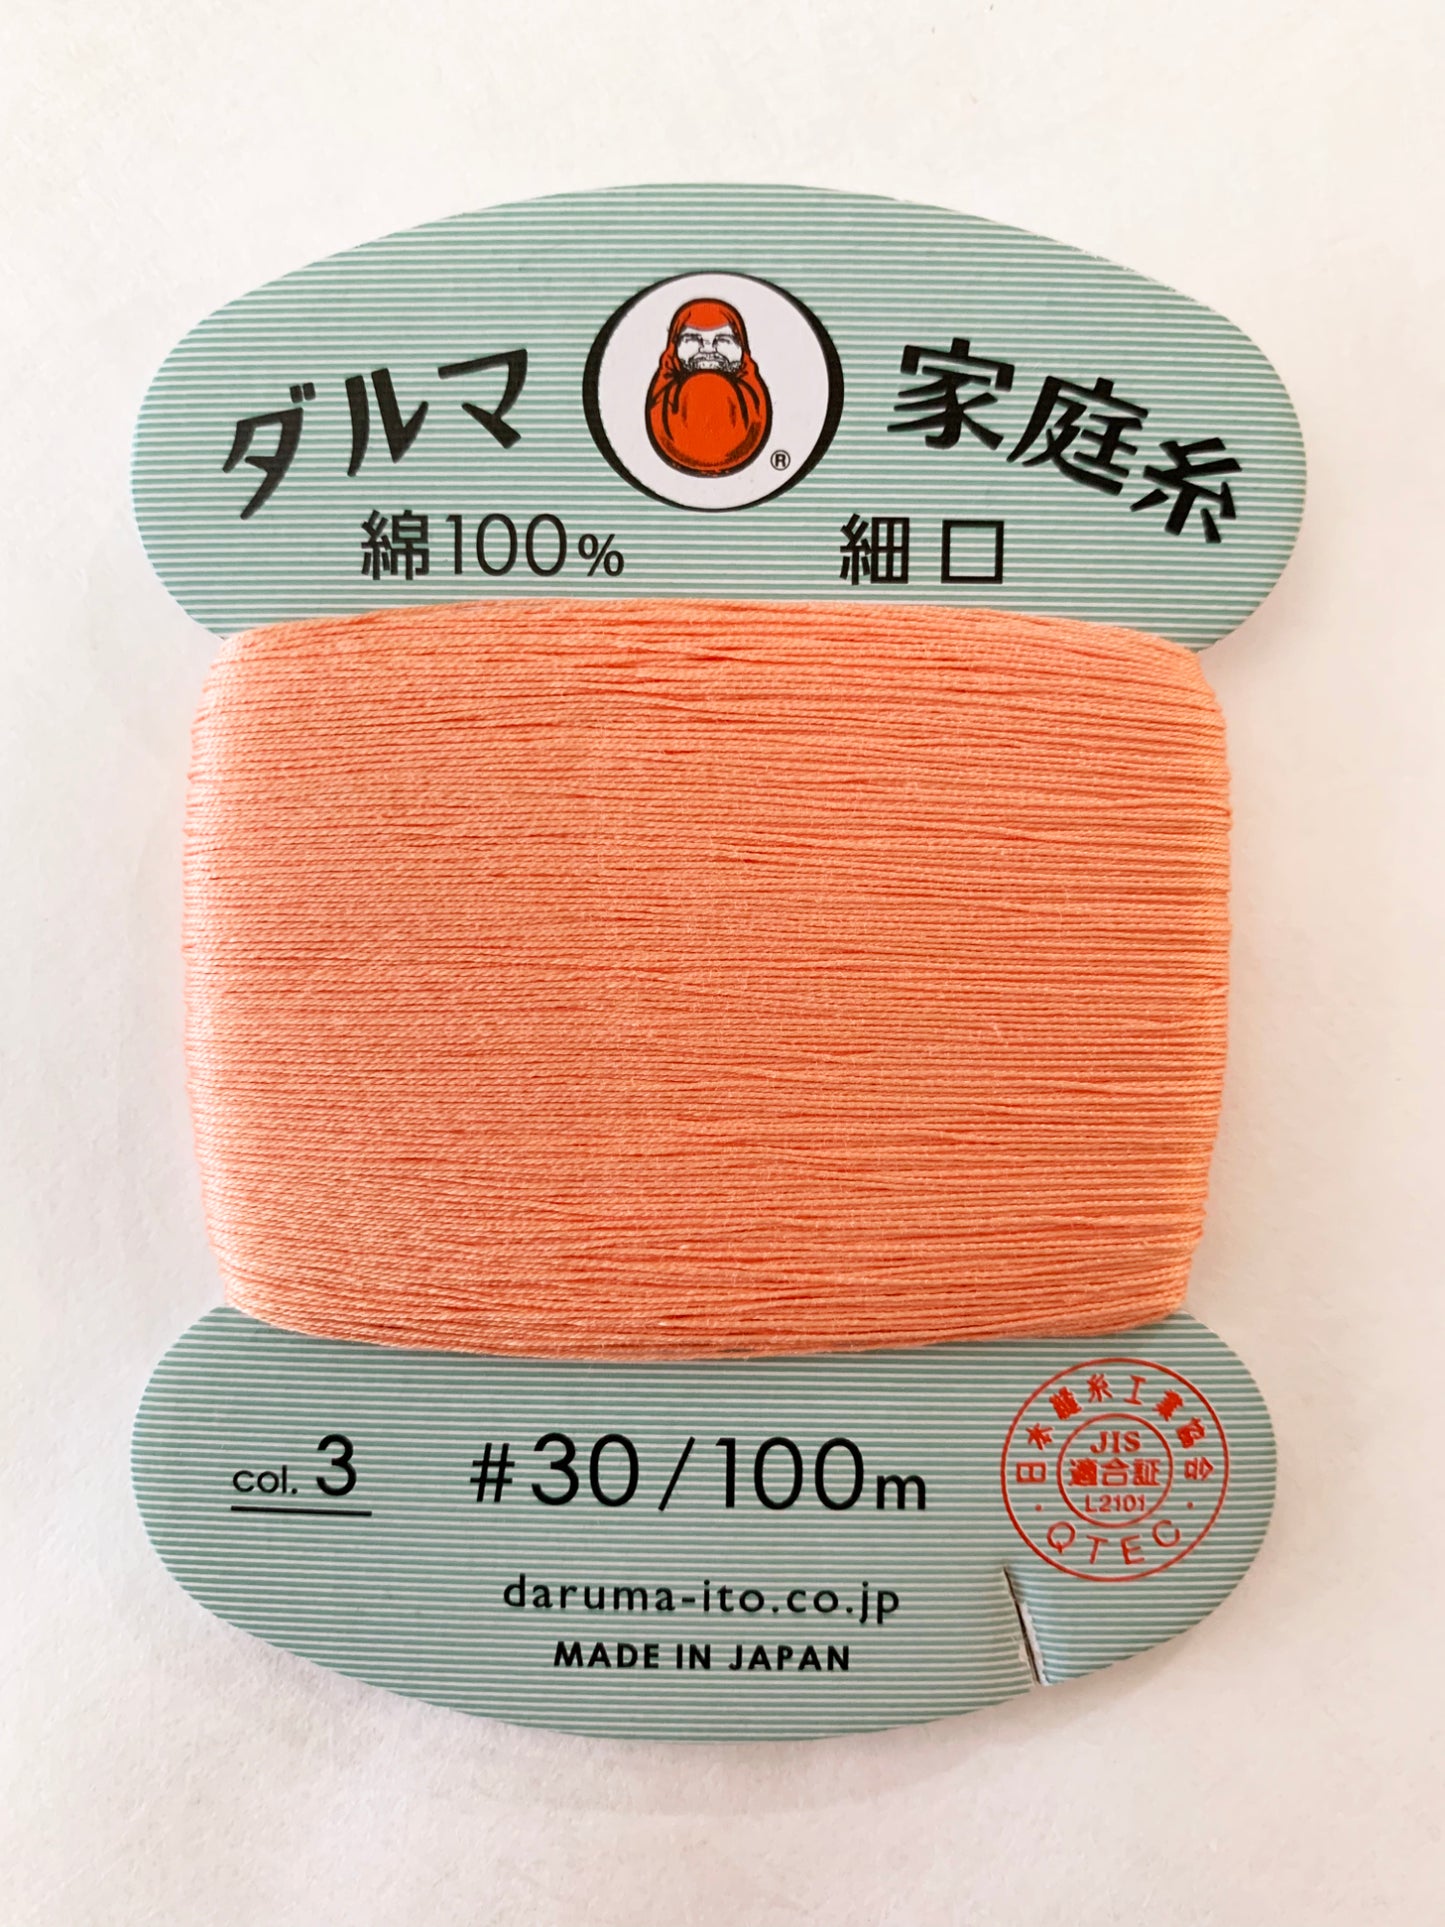 Daruma Home Thread Color #3 Coral Pink さんご Hand Sewing Japanese Cotton 100 meter skein size #30